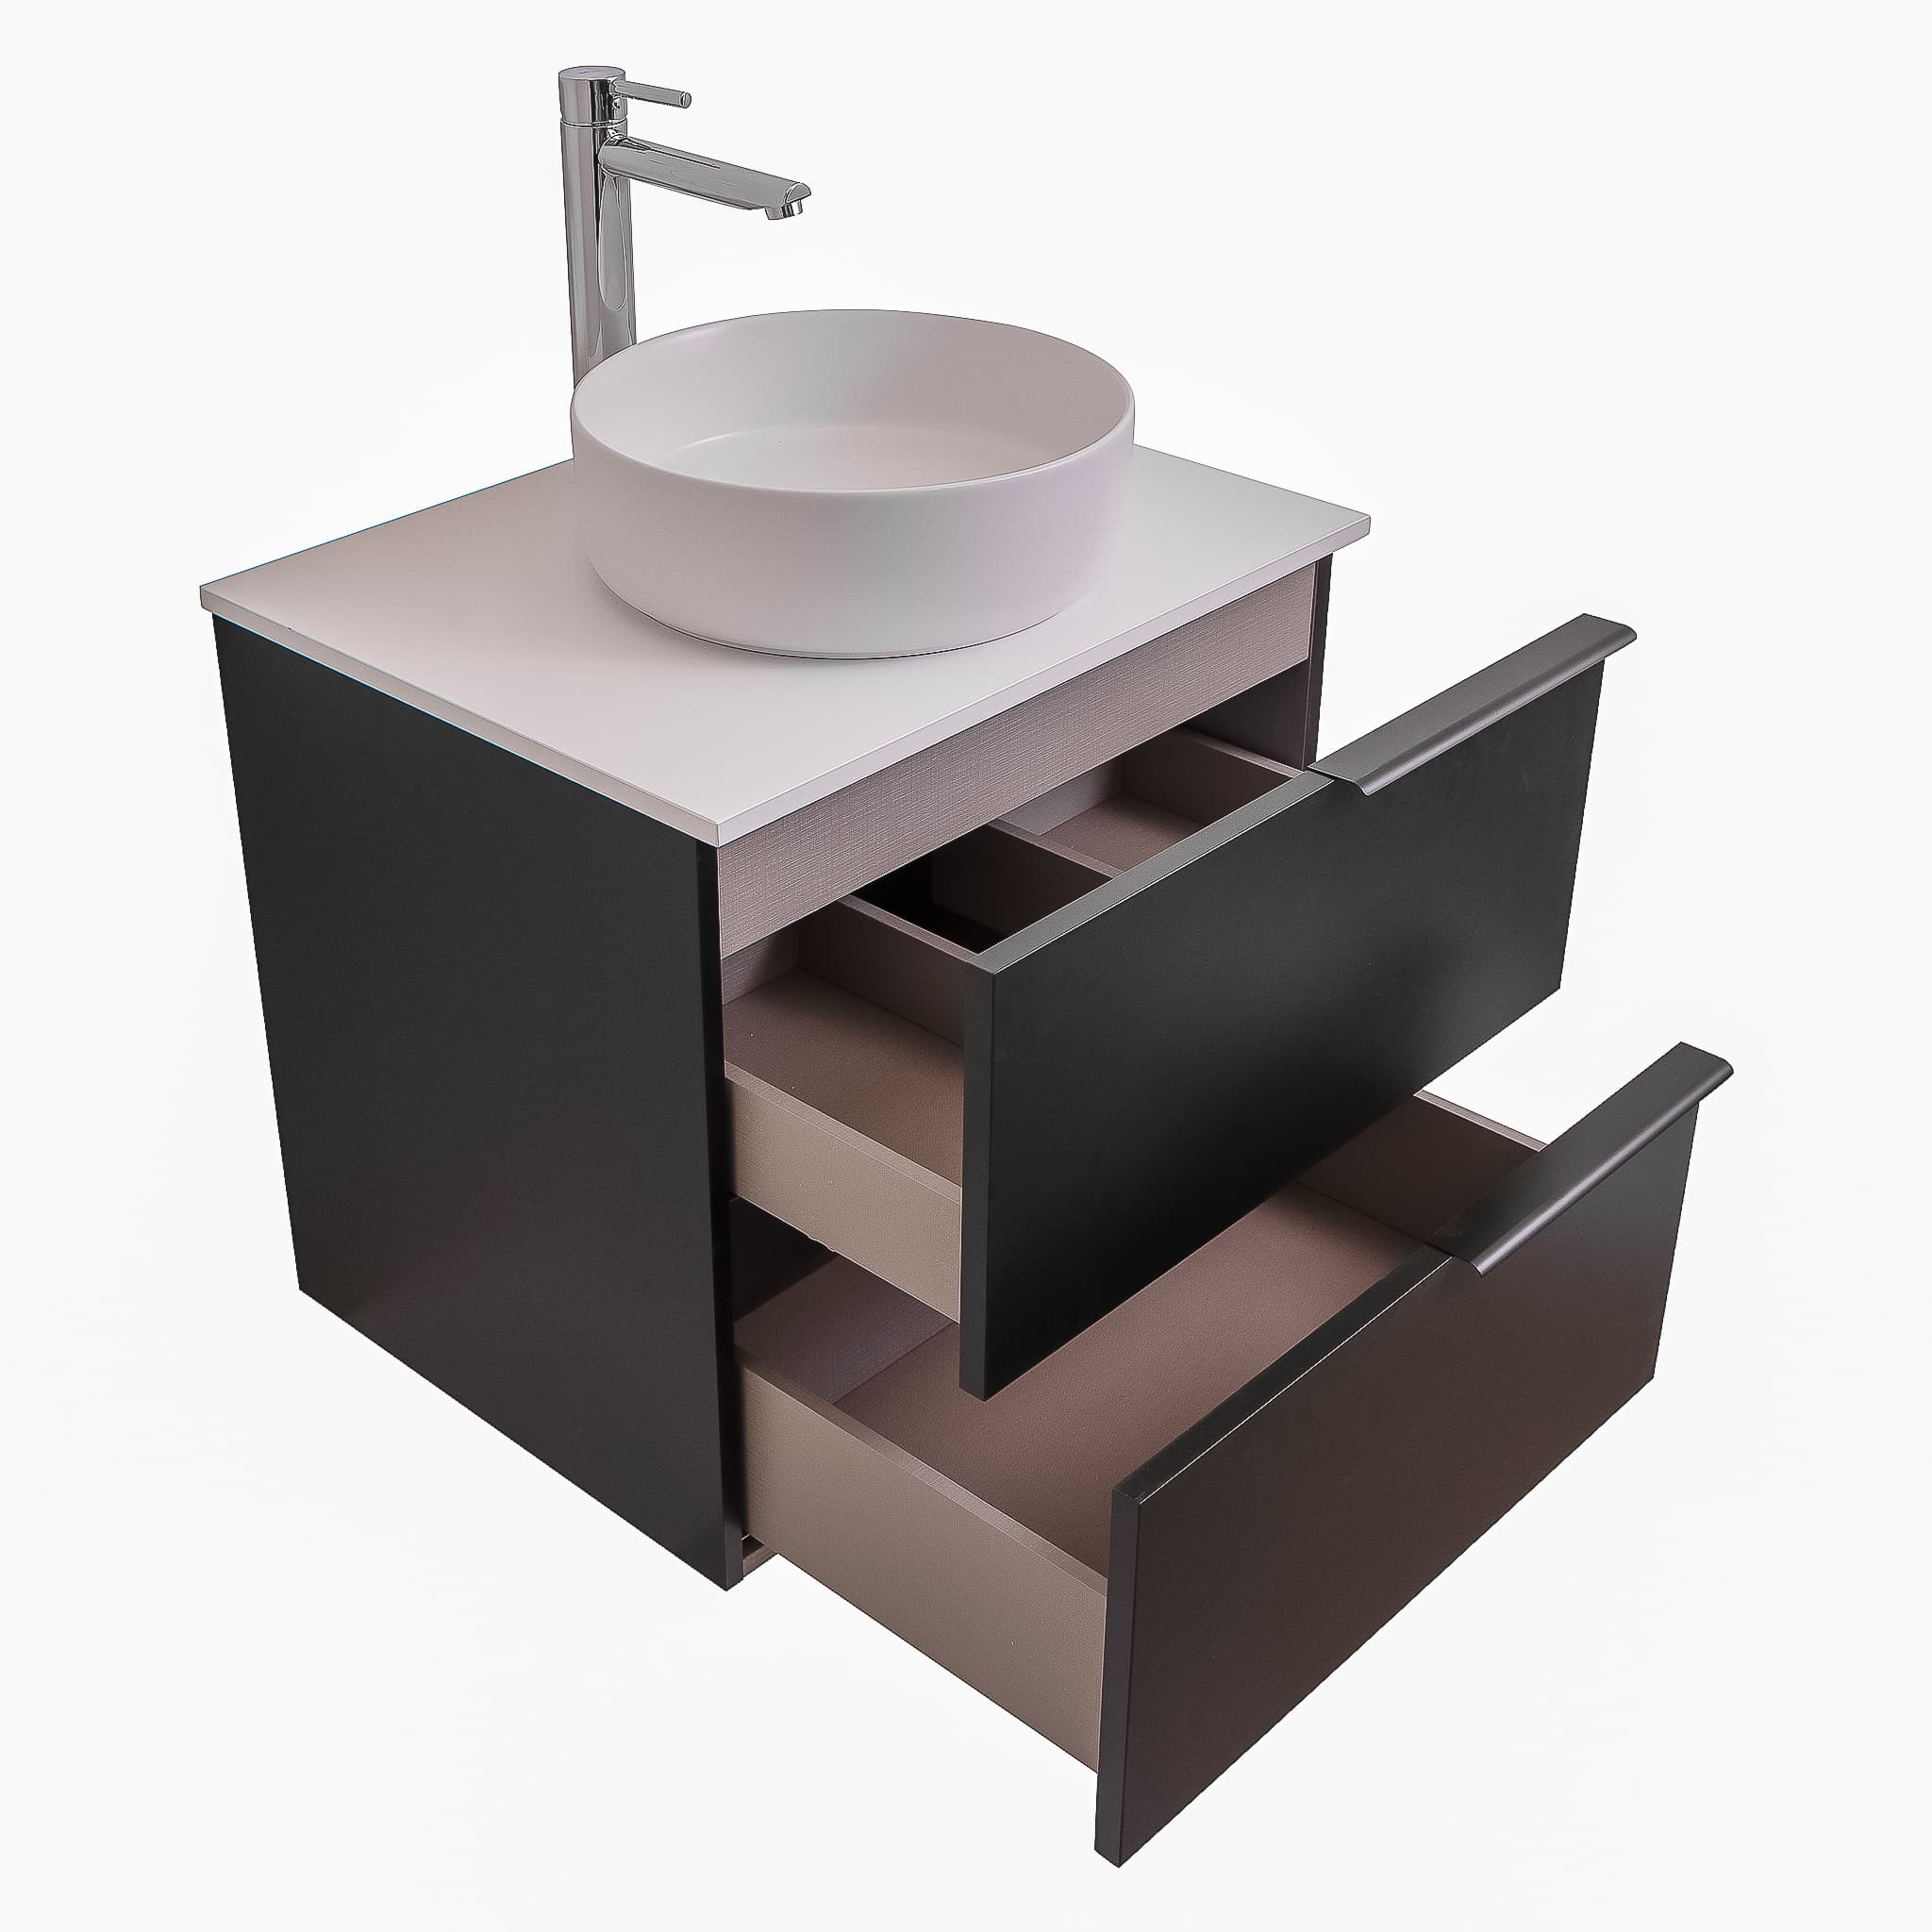 Mallorca 23.5 Matte Black Cabinet, Ares White Top And Ares White Ceramic Basin, Wall Mounted Modern Vanity Set